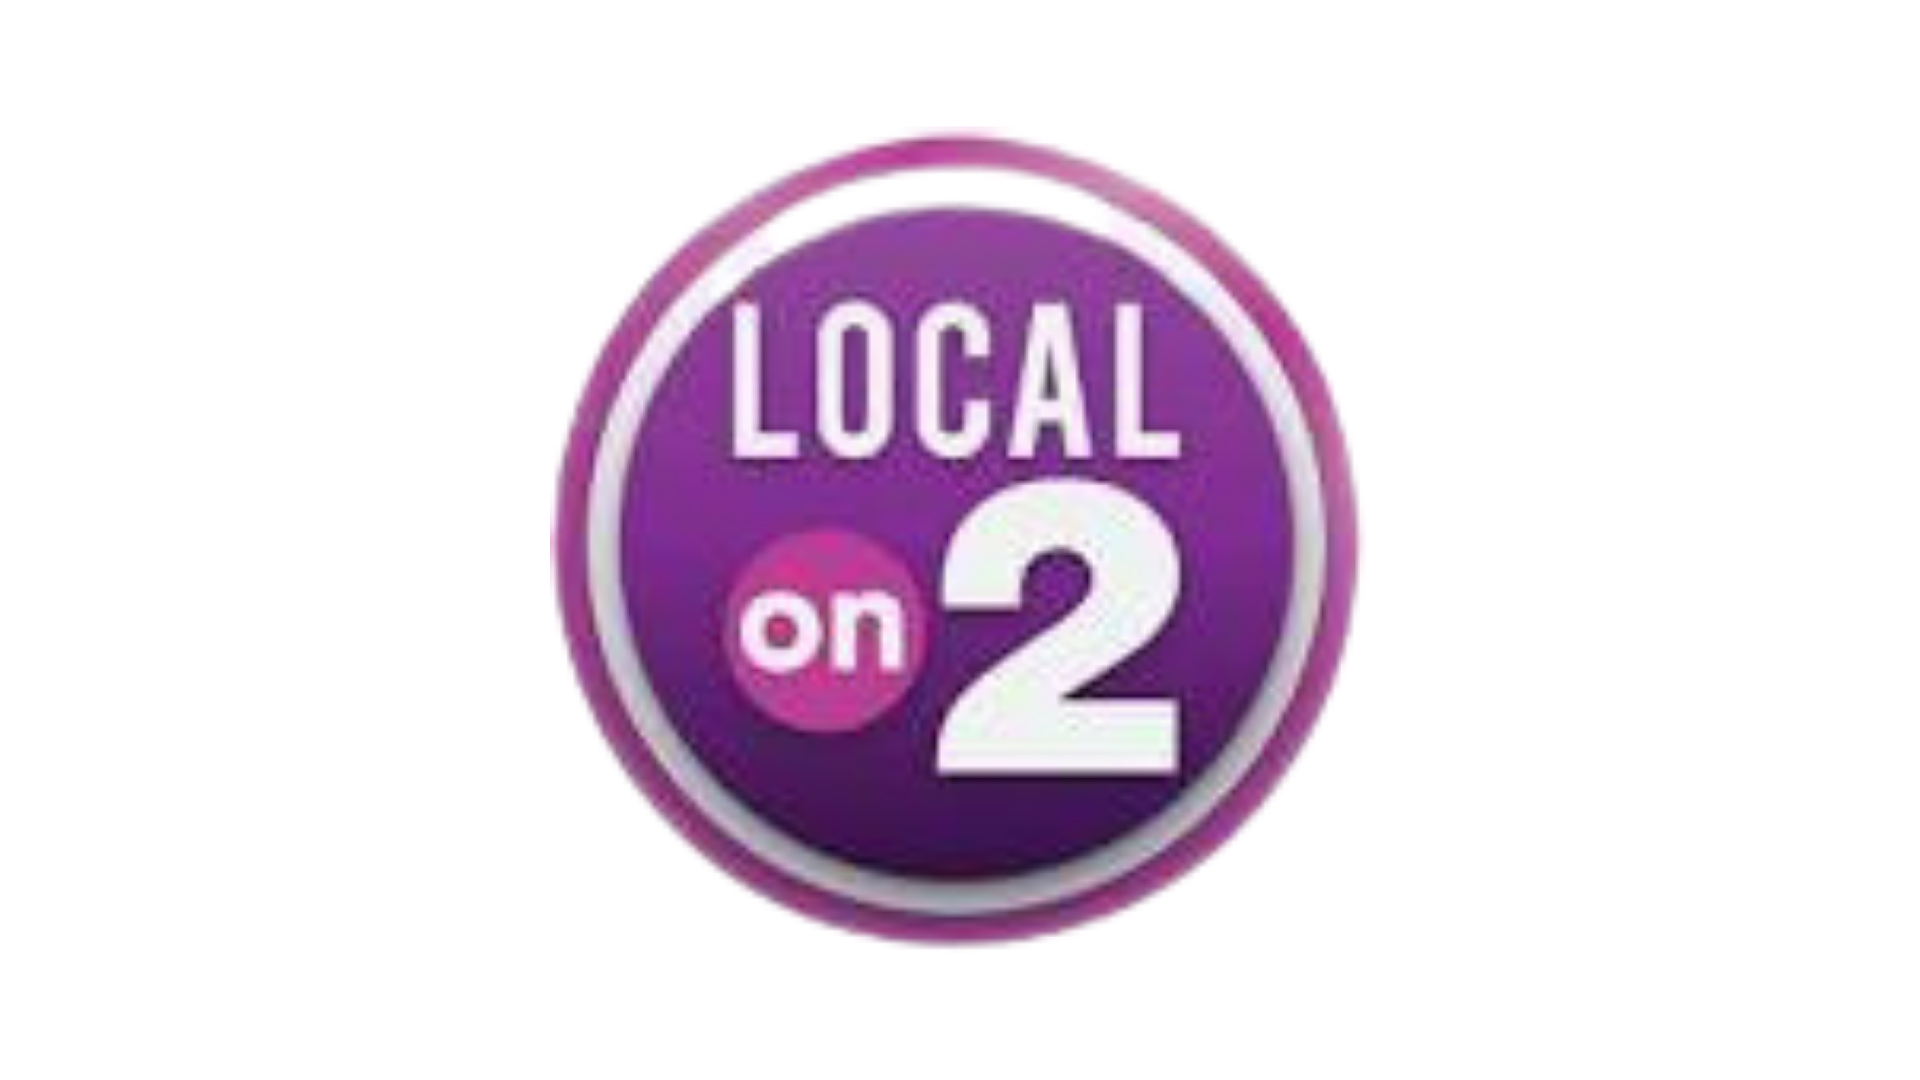 Local on 2